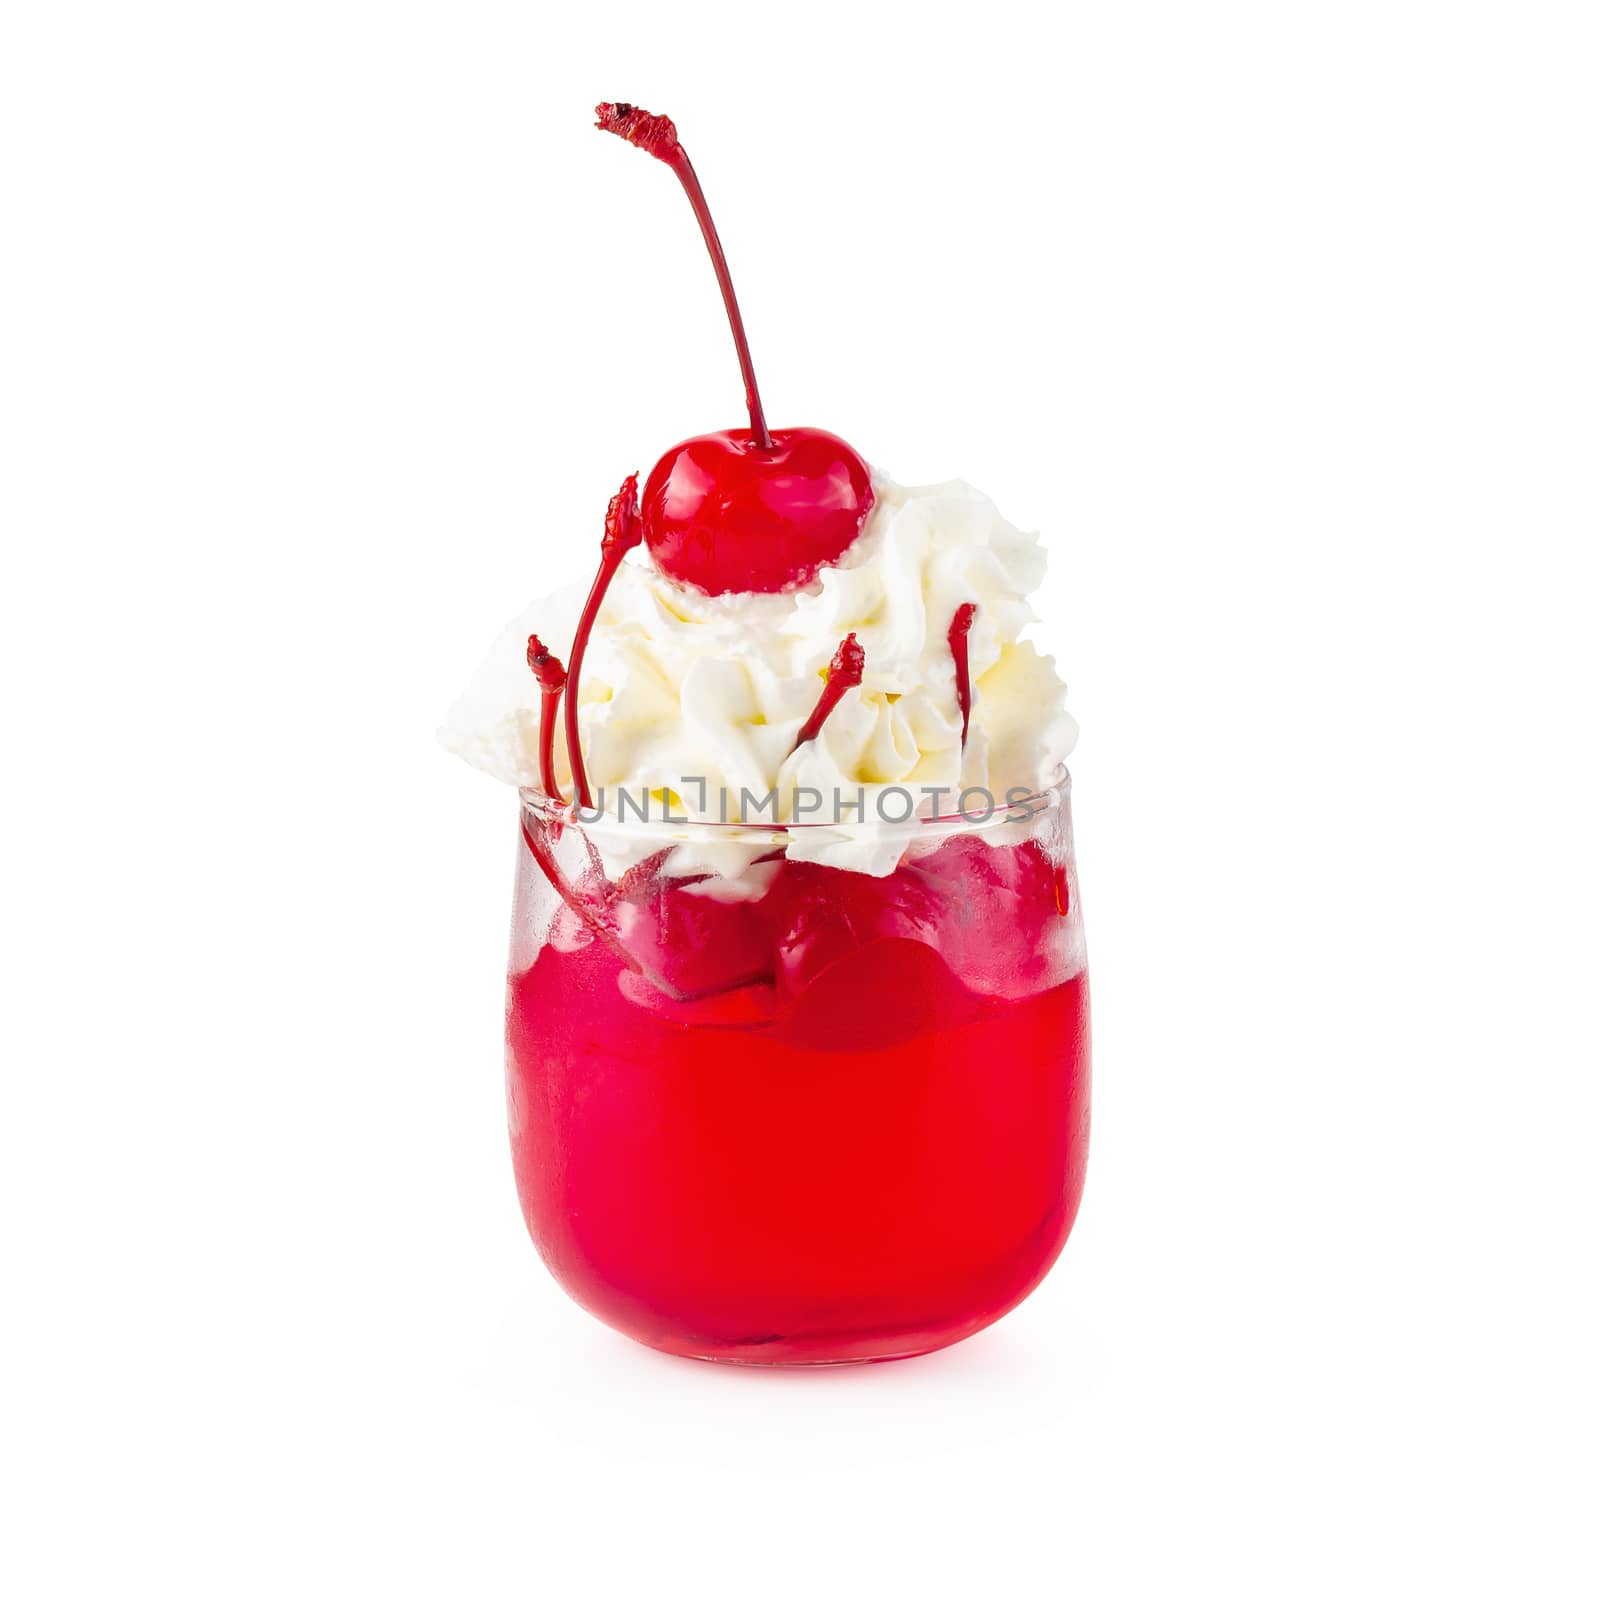 Strawberry jelly in a glass topping with cherries and whipped cream isolated on white background.